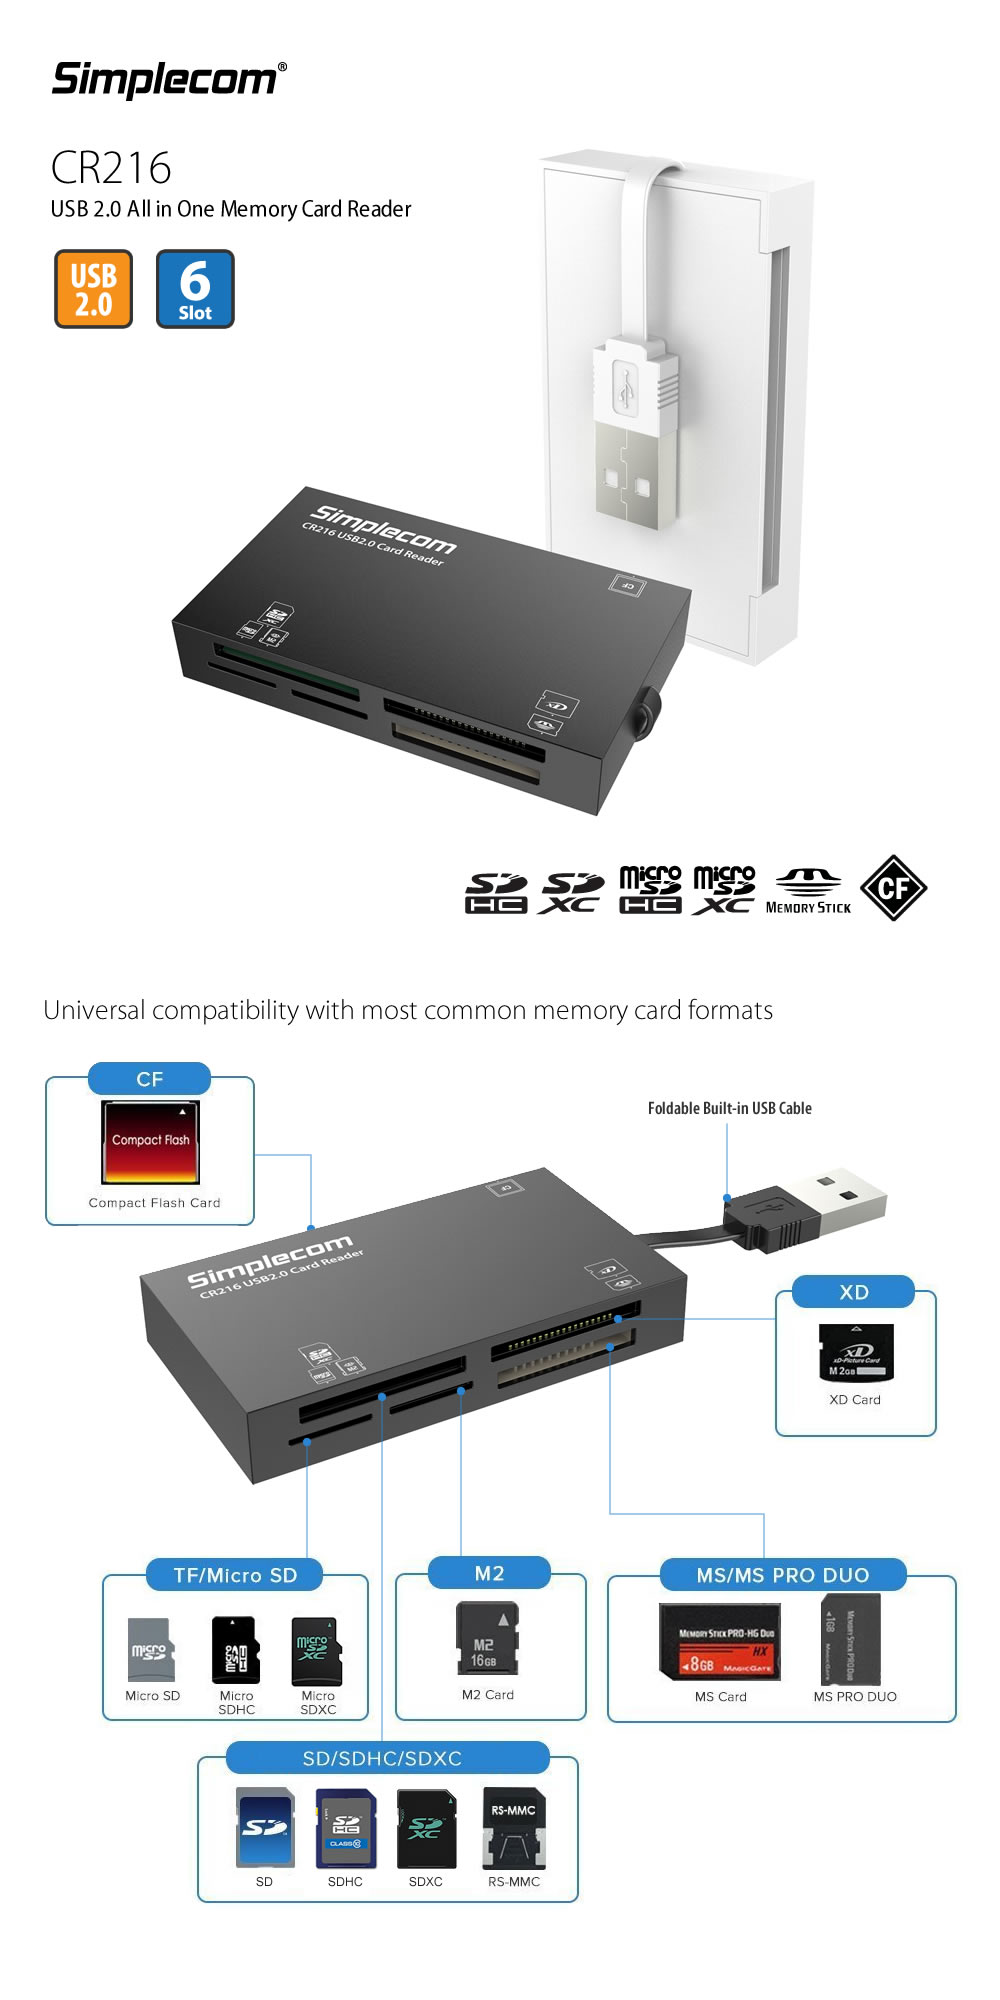 Simplecom CR216 USB 2.0 All in One Memory Card Reader 6 Slot for MS M2 CF XD Micro SD HC SDXC Black 1